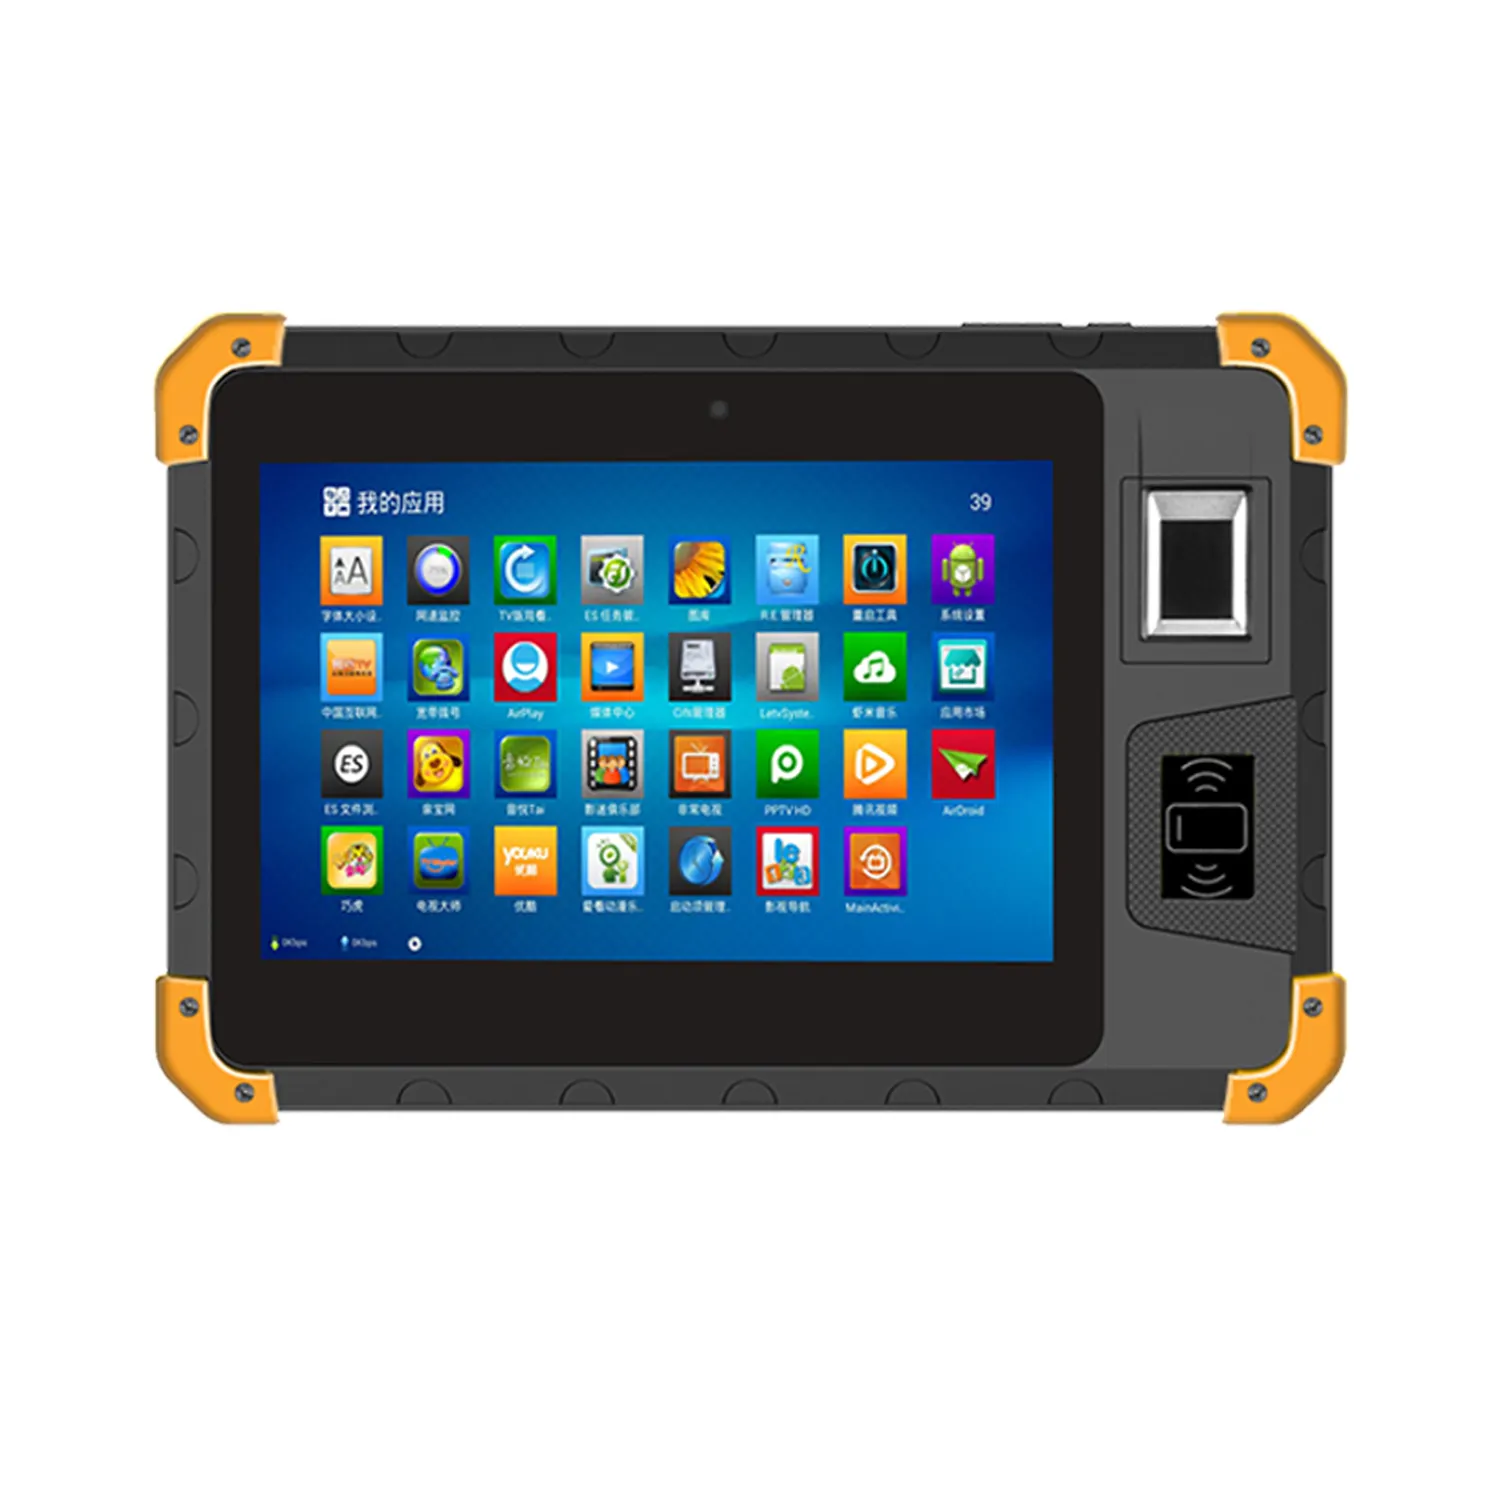 8 inch biometric fingerprint scanner industrial tablet android pc with NFC reader Z200